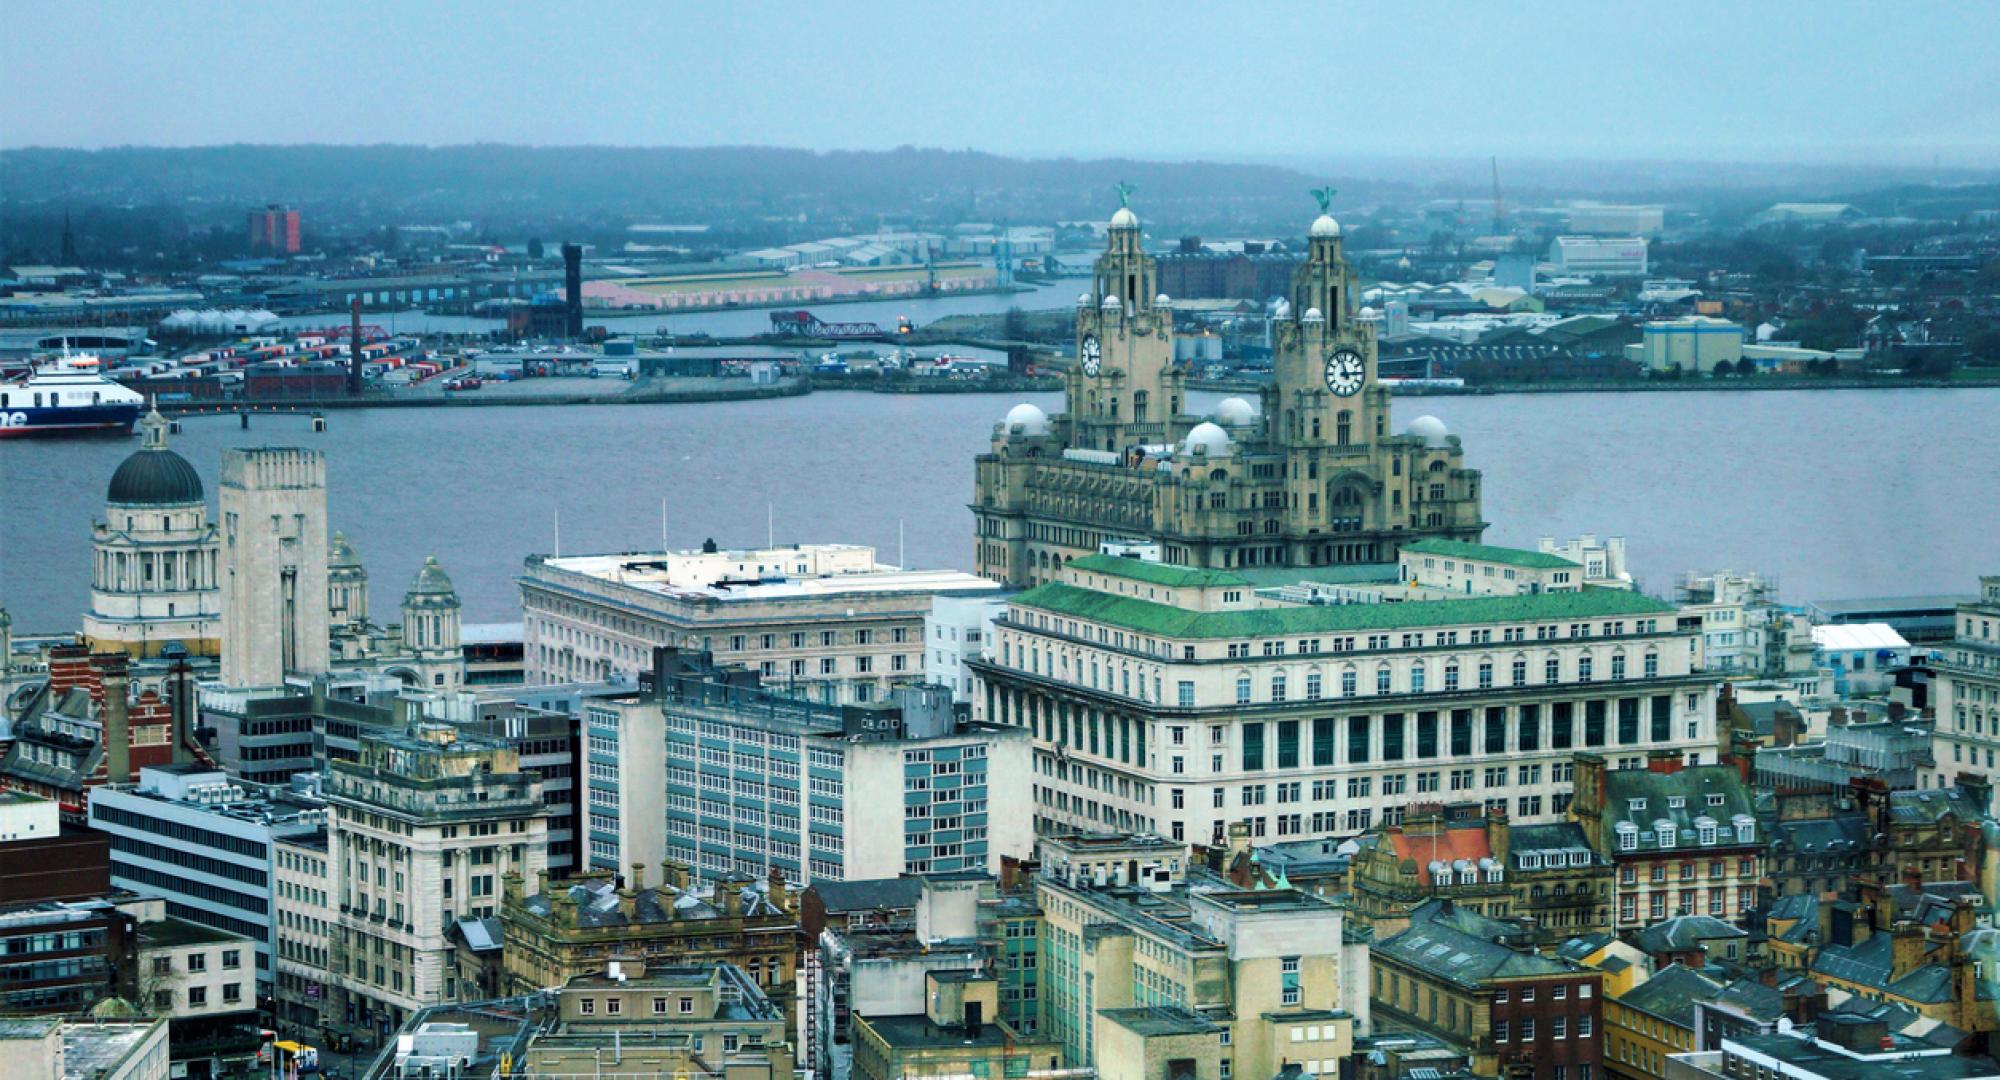 view of Liverpool and the Royal Liver Building on the river Mersey England.